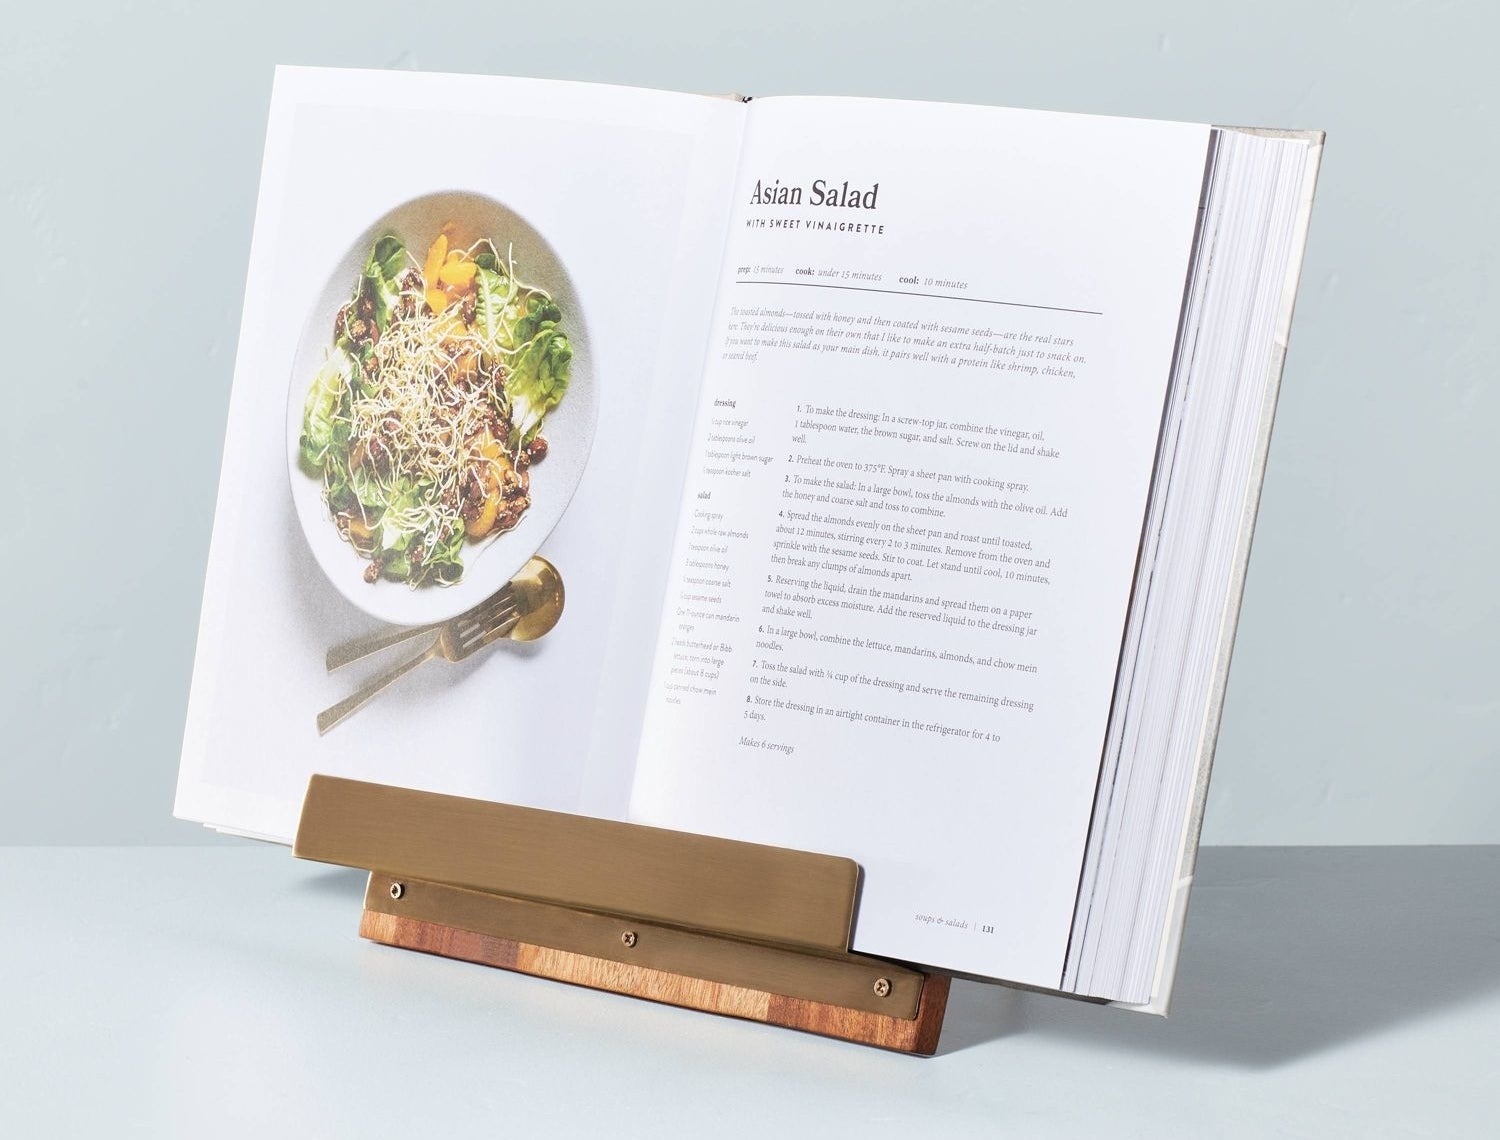 The holder with an open cookbook on it